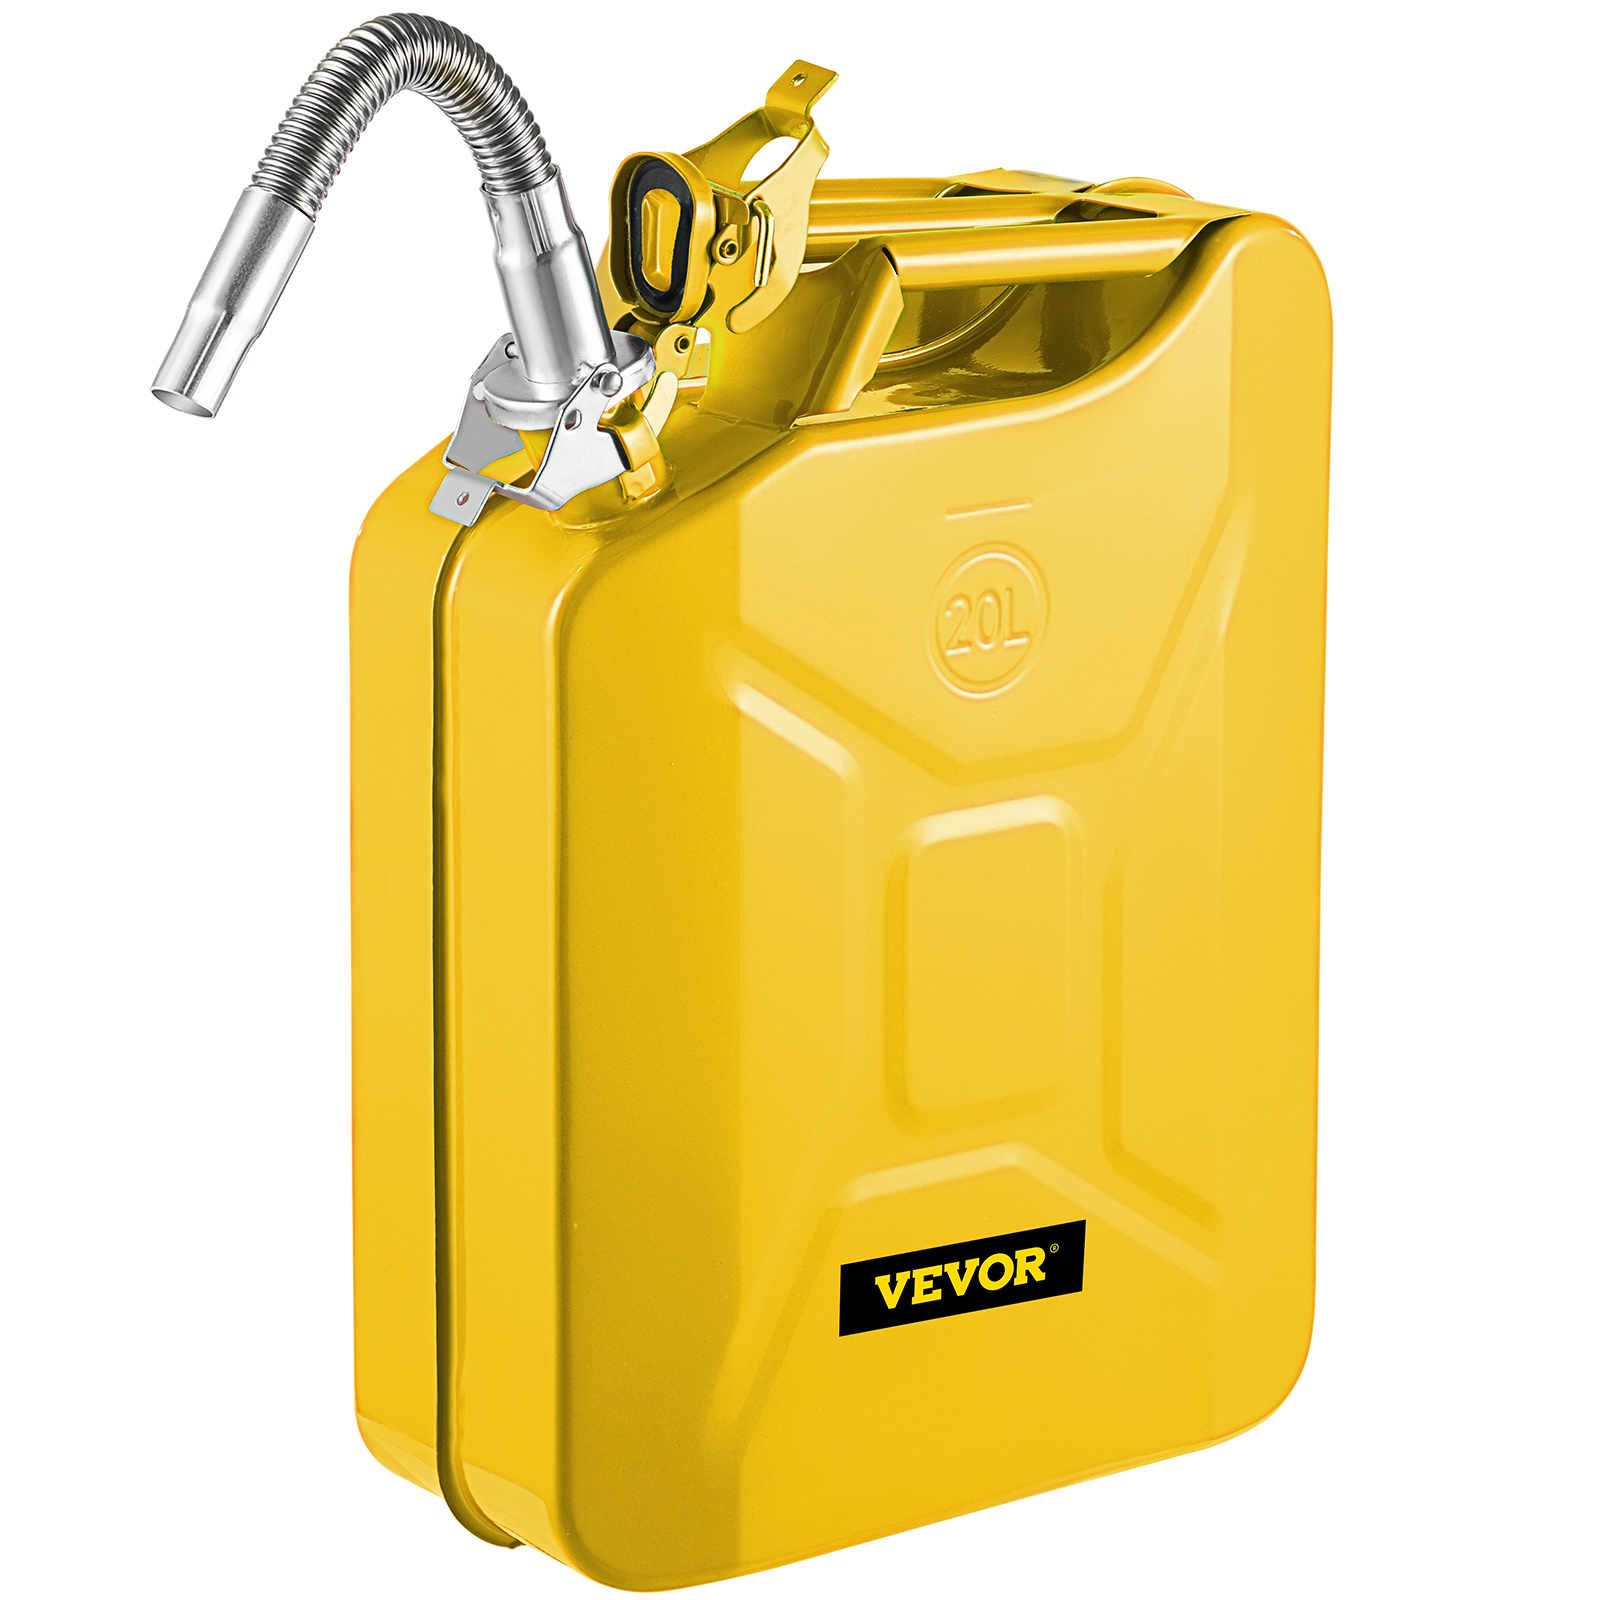 METAL JERRY CAN SPOUT WITH RUBBER FLEXIBLE NOZZLE FUNNEL PETROL DIESEL OR CANS 